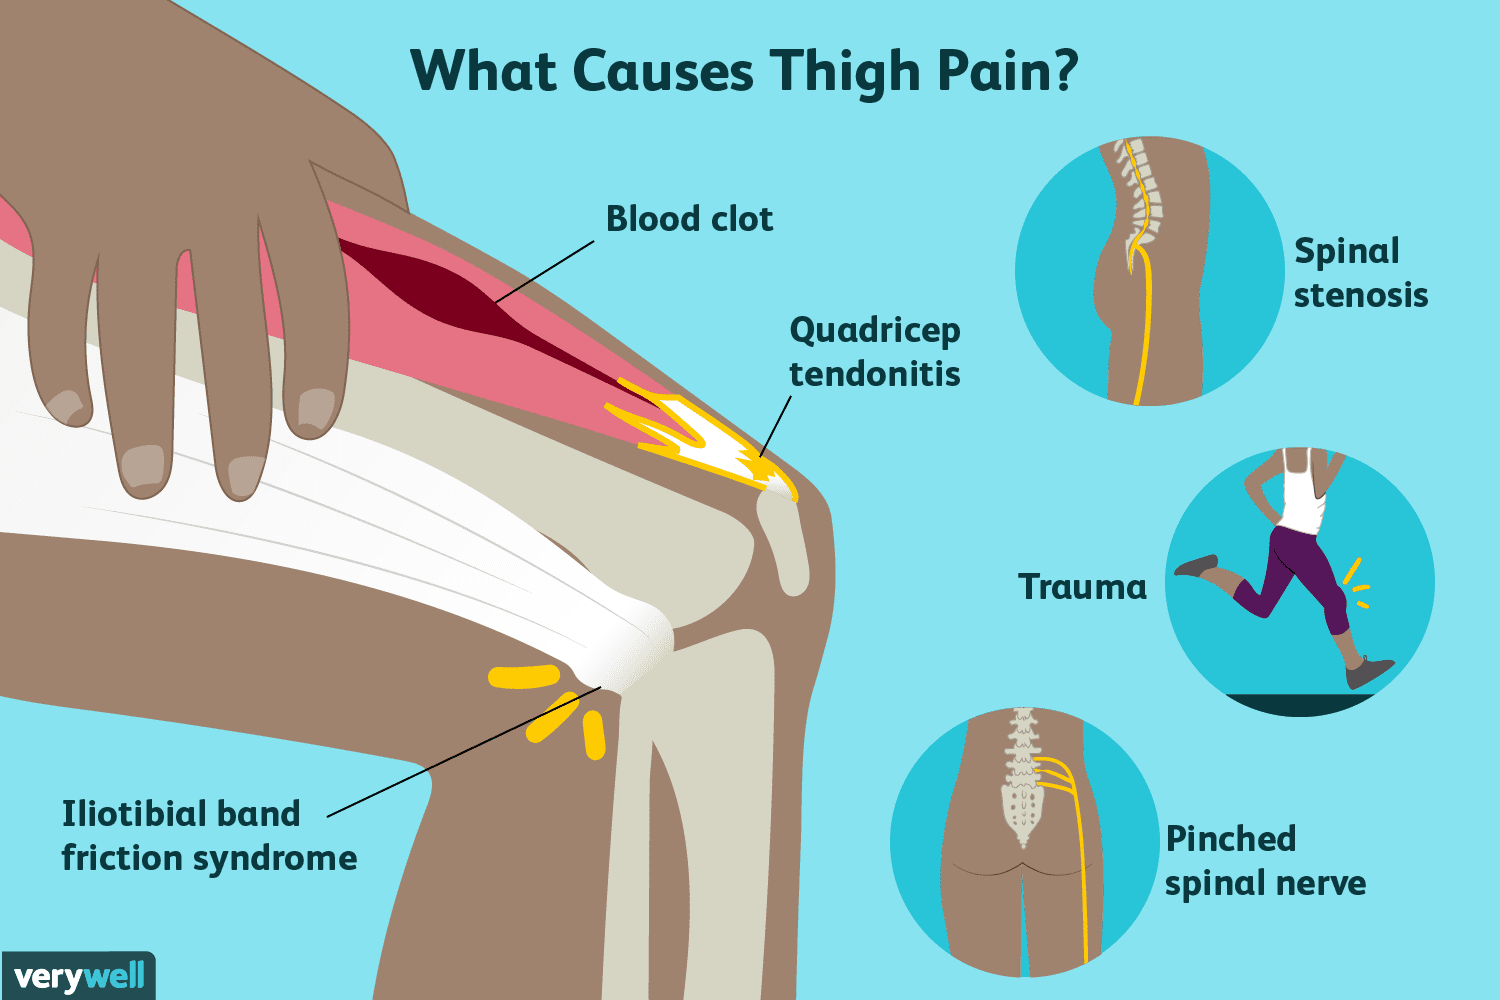 Thigh Pain: Causes, Treatment, and When to See A Doctor